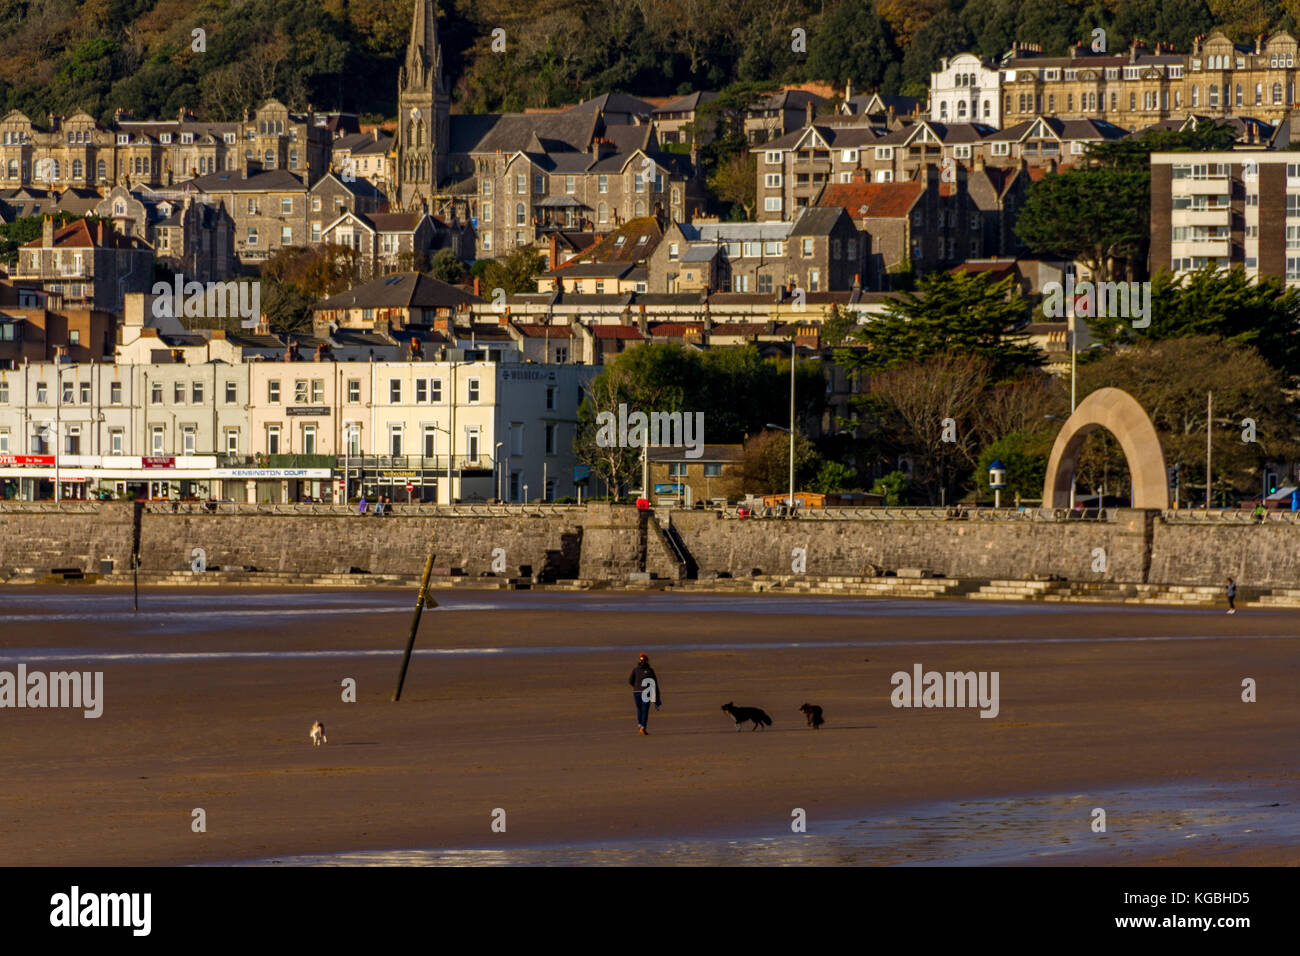 Weston-Super-Mare, Somerset, Avon, England, UK. 06th Nov, 2017. Woman plays with dogs on beach during brief sunny spell on autumn day. Stock Photo